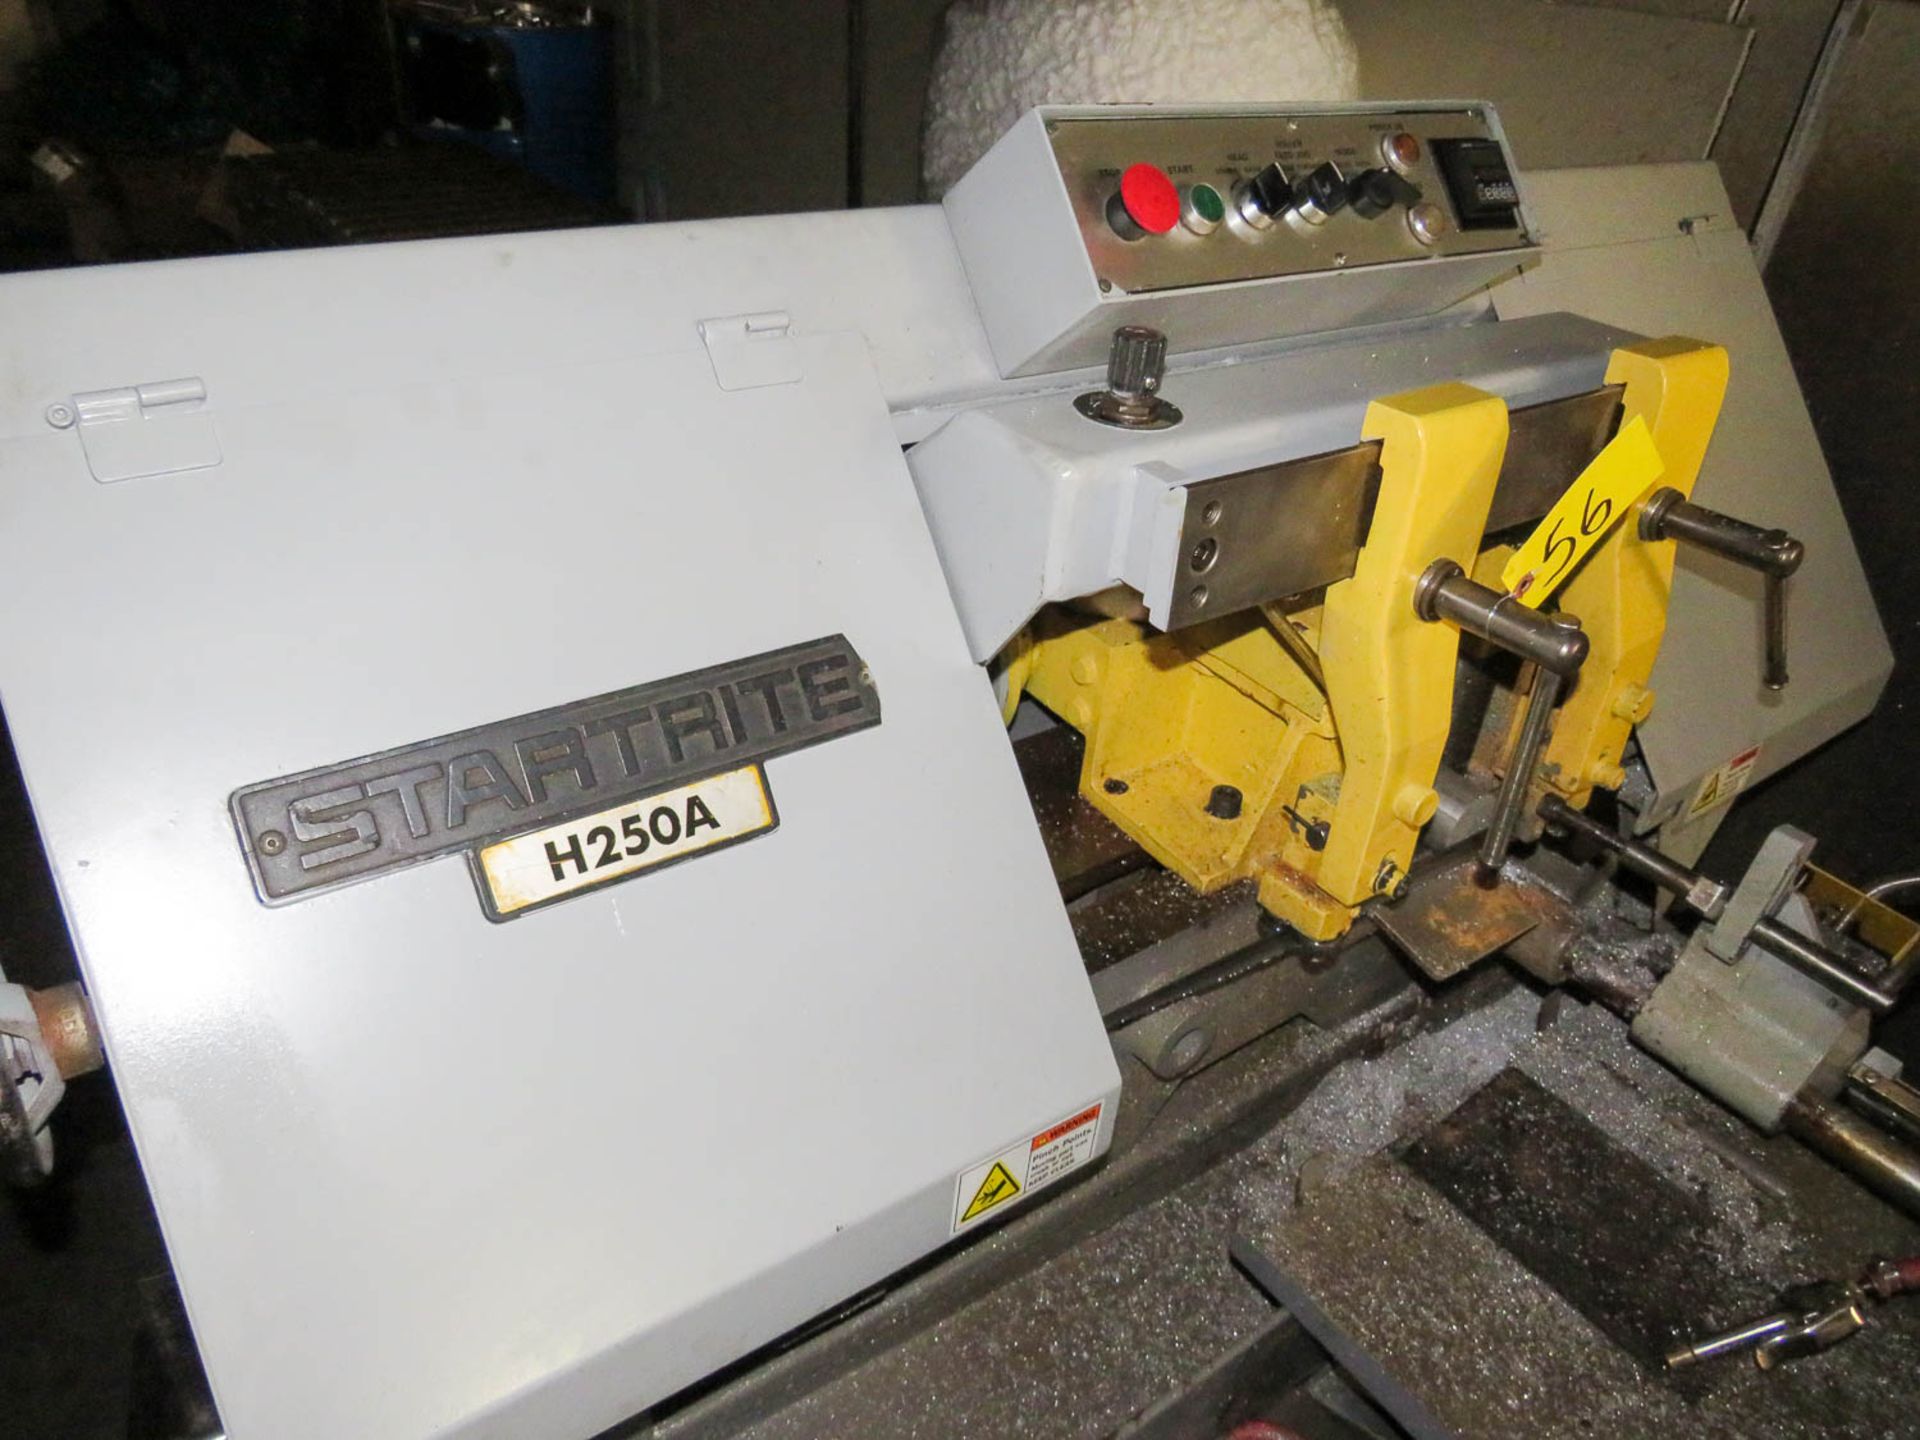 10" X 10" STARTRITE MDL. H250A AUTOMATIC FEED HORIZONTAL BANDSAW, 1" BLADE, AUTONICS PRESET CONTROL, - Image 3 of 4